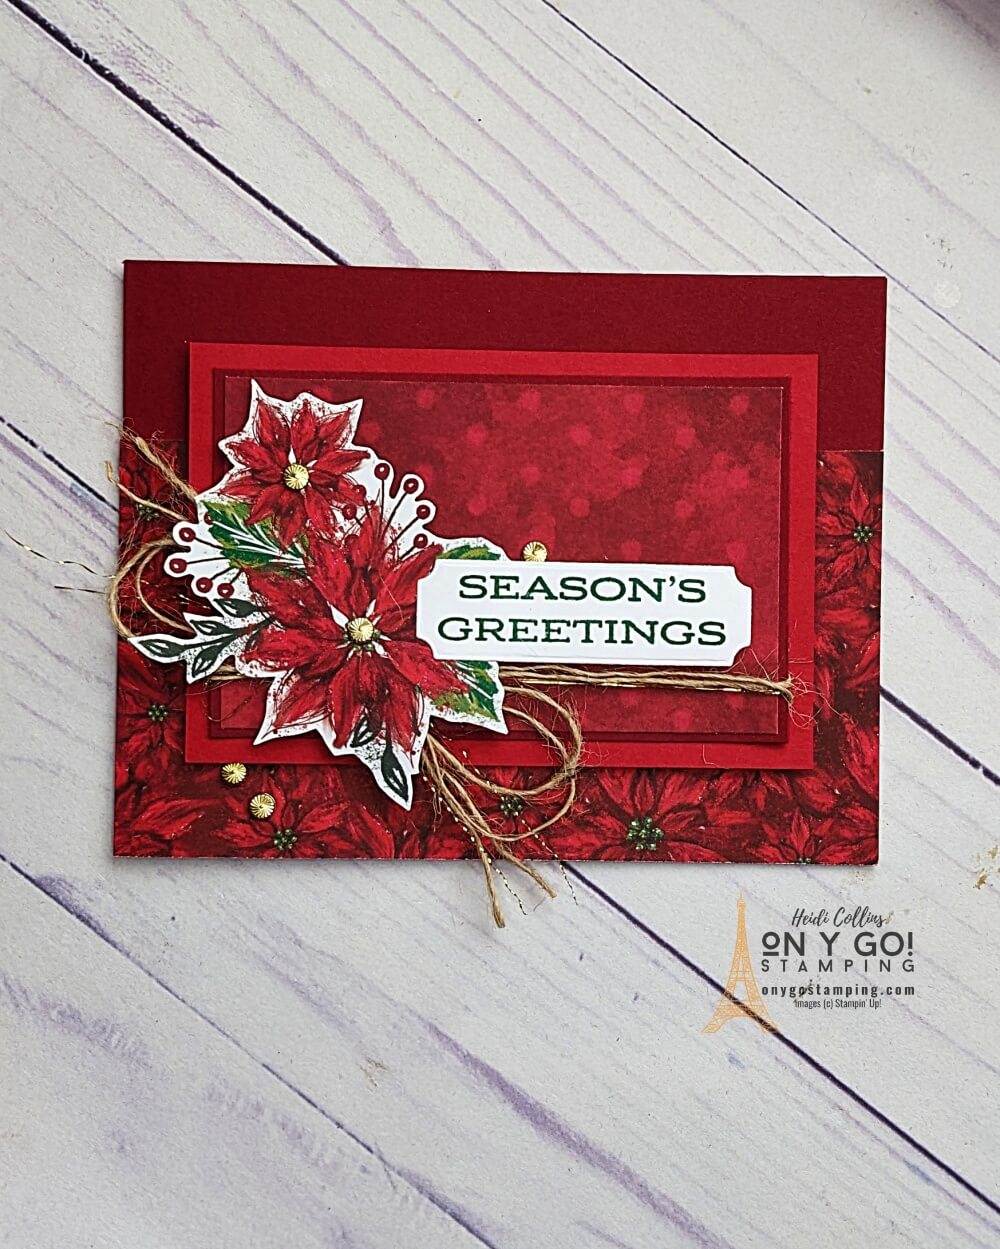 Use the Leaves of Holly stamp set and Boughs of Holly patterned paper from Stampin' Up!® to create beautiful handmade holiday cards.